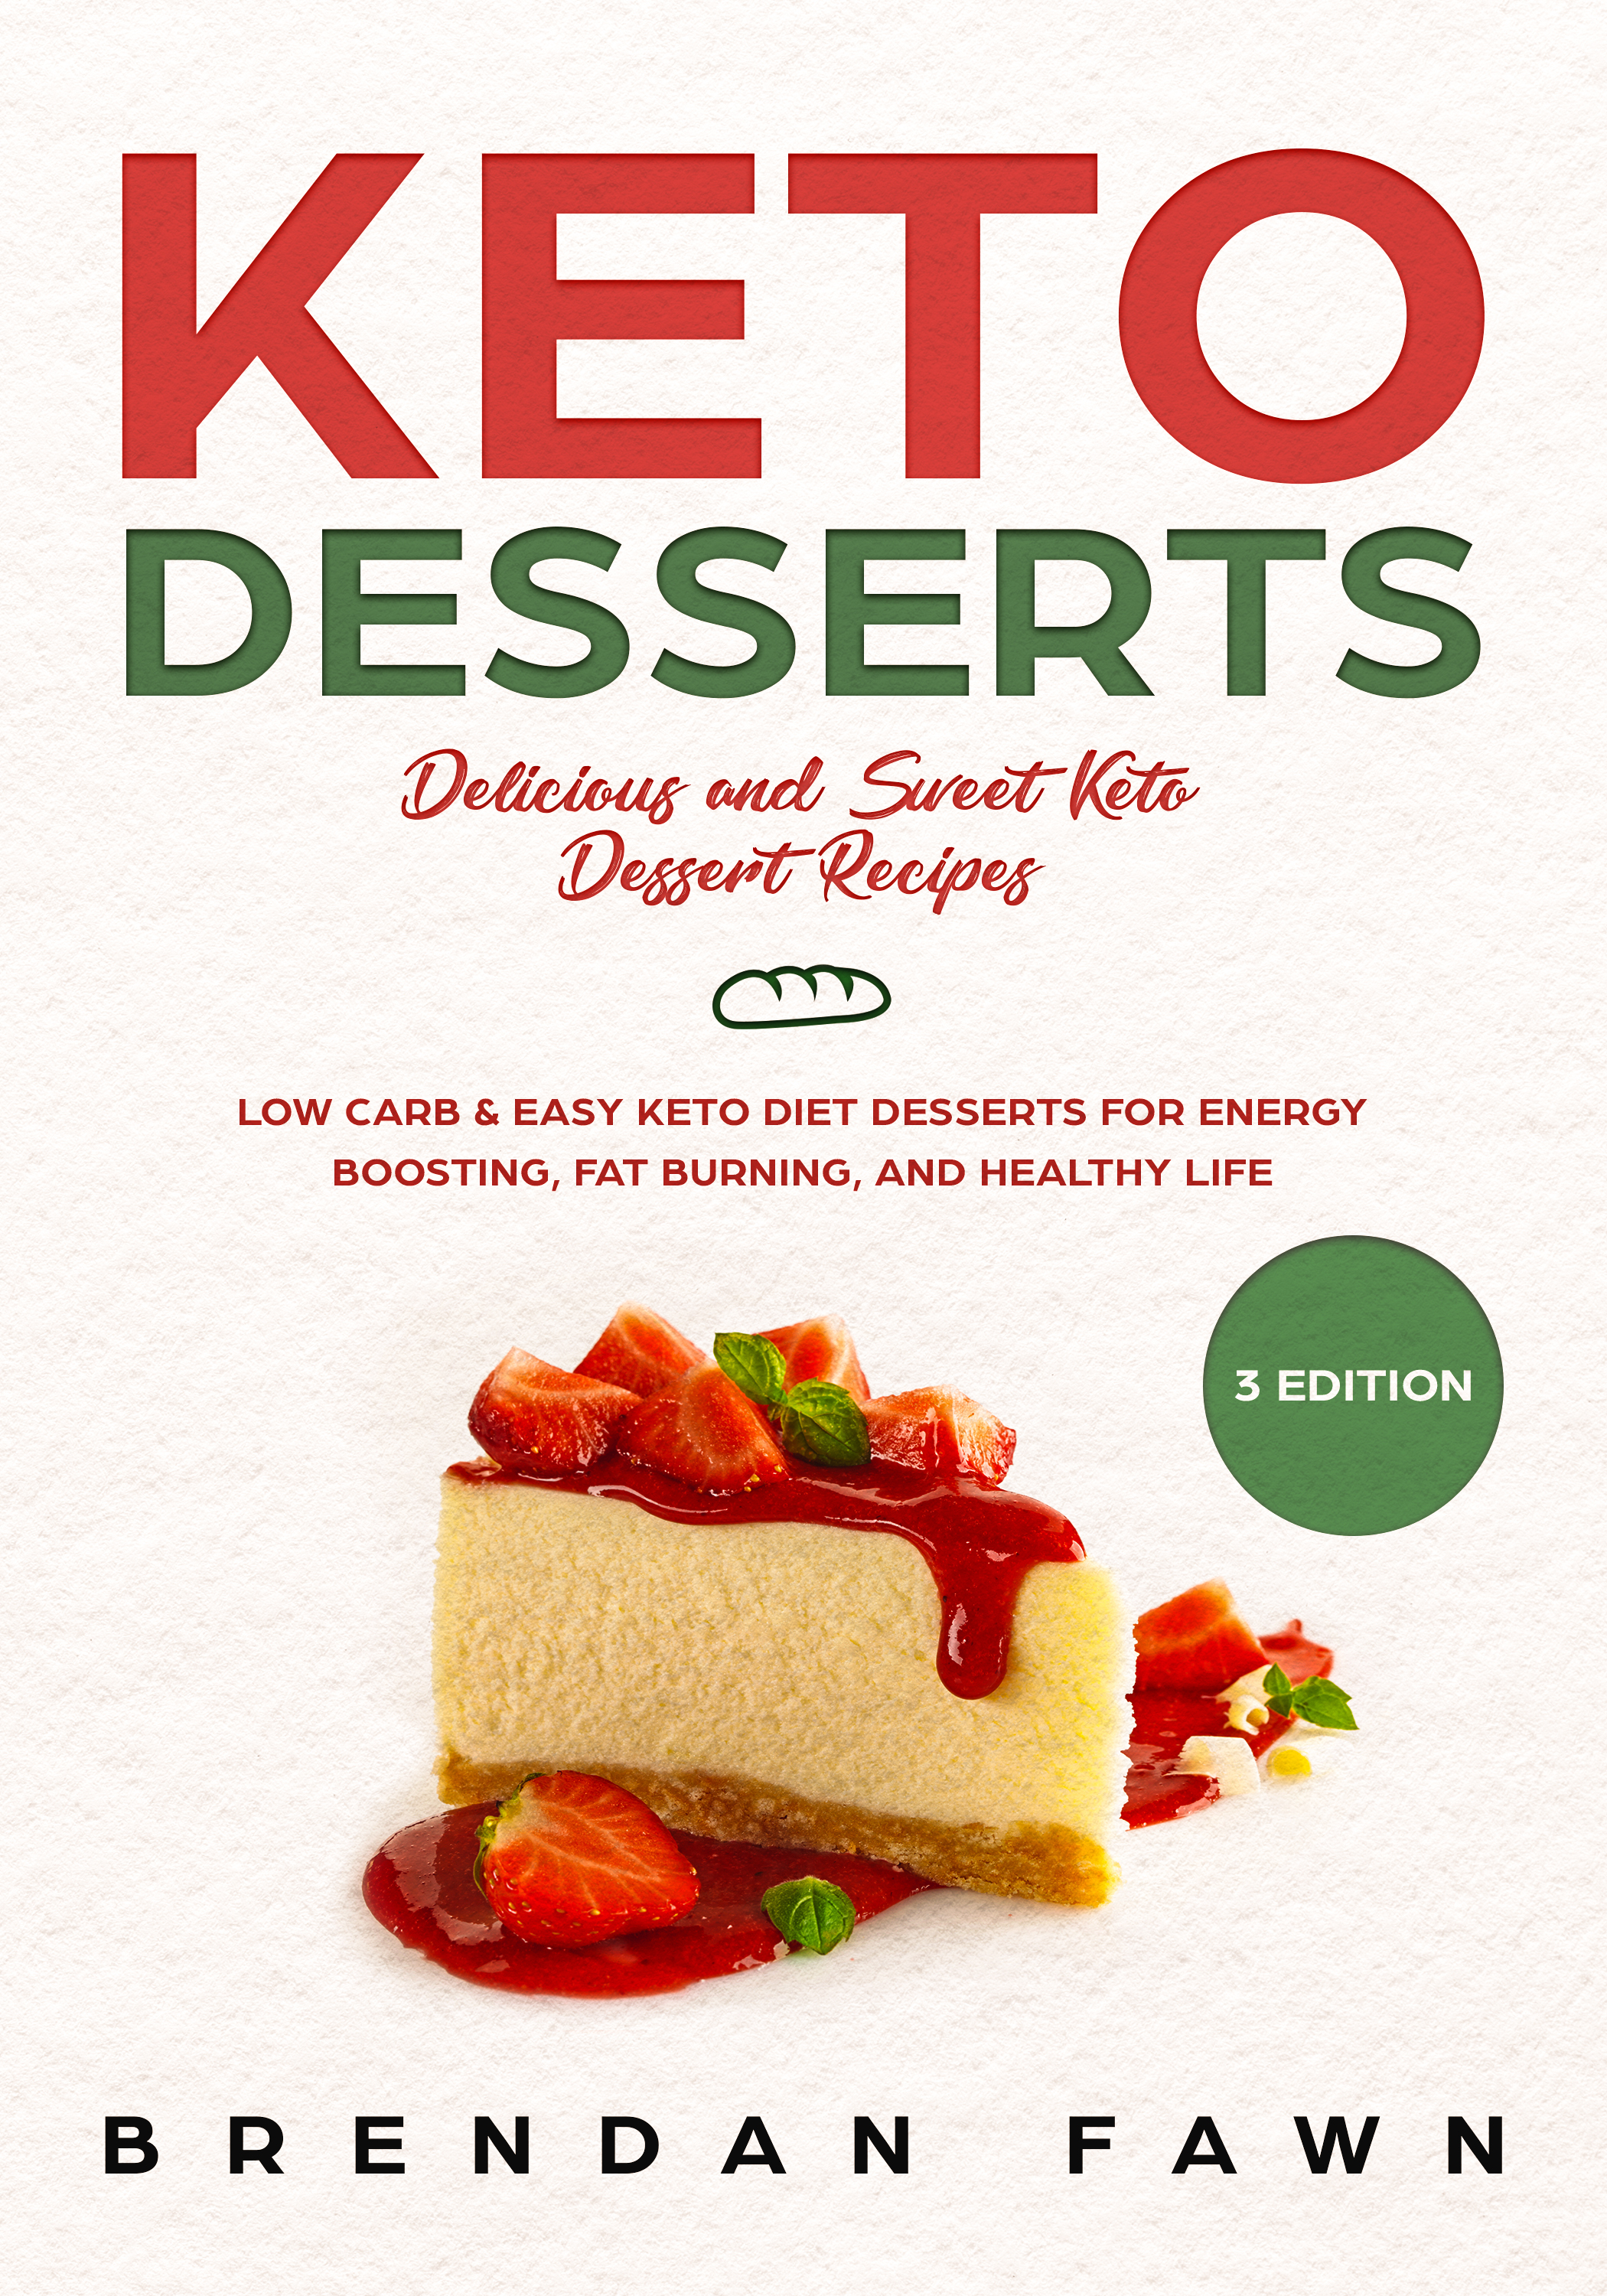 FREE: Keto Desserts: Delicious and Sweet Keto Dessert Recipes by Brendan Fawn